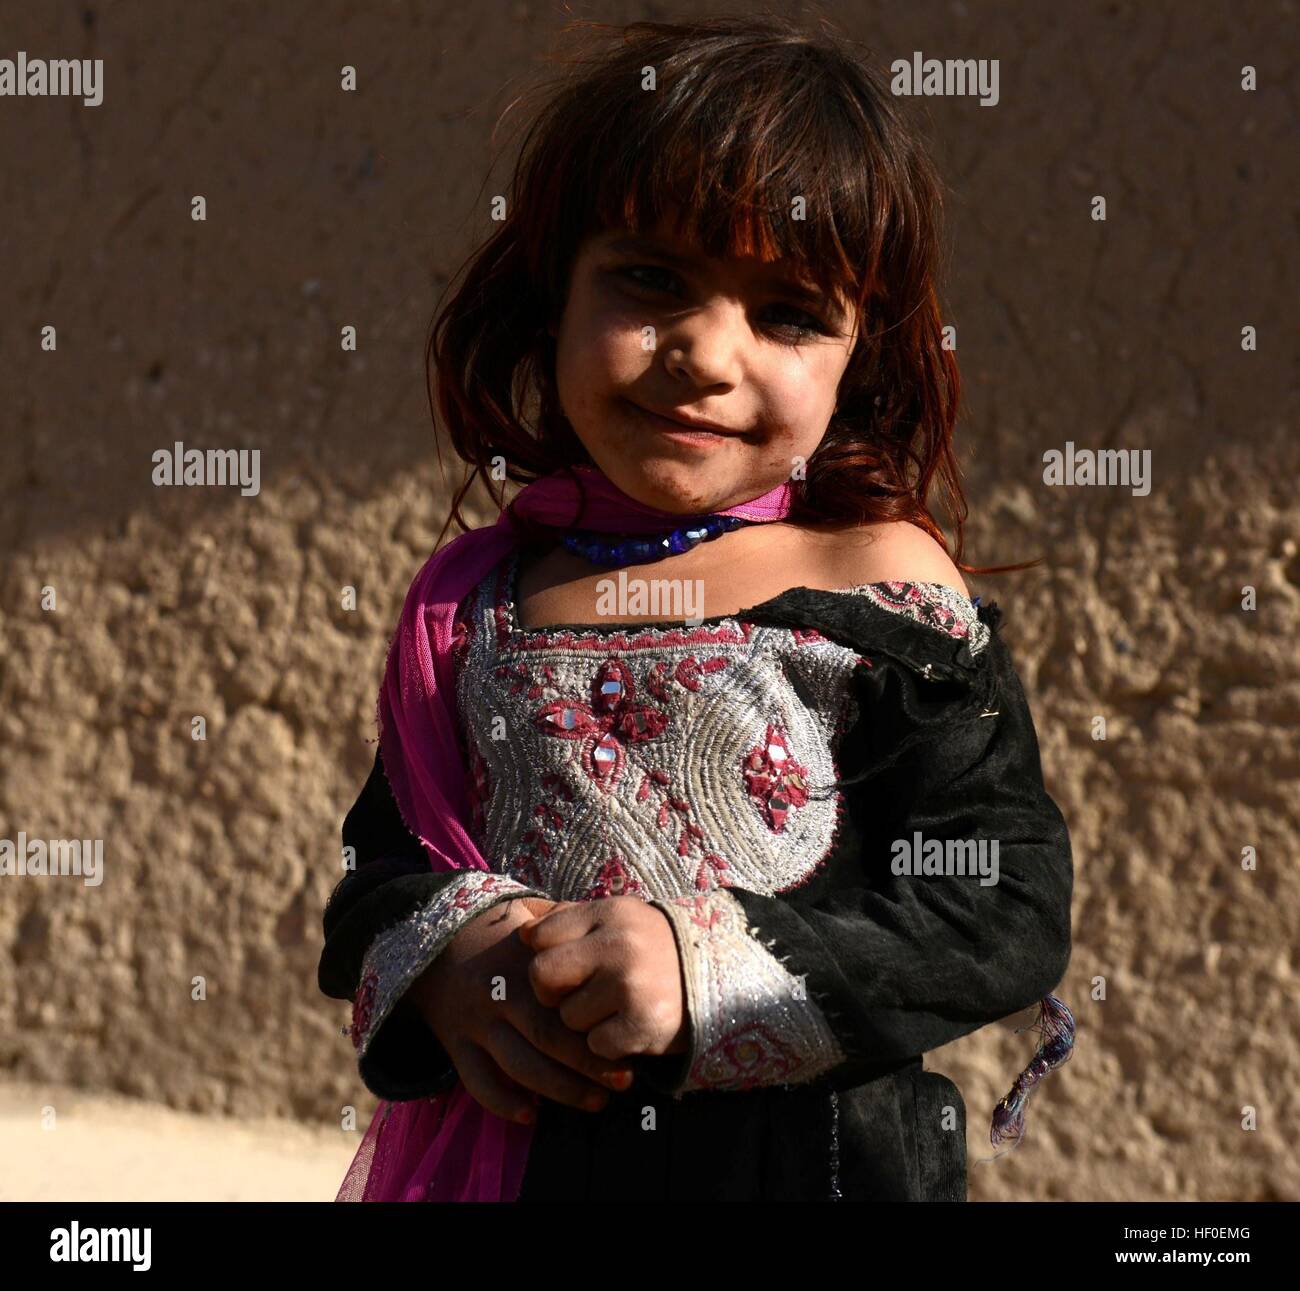 Qalat, Afghanistan's Zabul province. 26th Dec, 2016. An Afghan displaced child stands outside her tent in Qalat city, capital of southern Afghanistan's Zabul province, Dec. 26, 2016. More than one million people have to flee their home due to conflicts in the country, according to officials. © Sanaullah Seiam/Xinhua/Alamy Live News Stock Photo